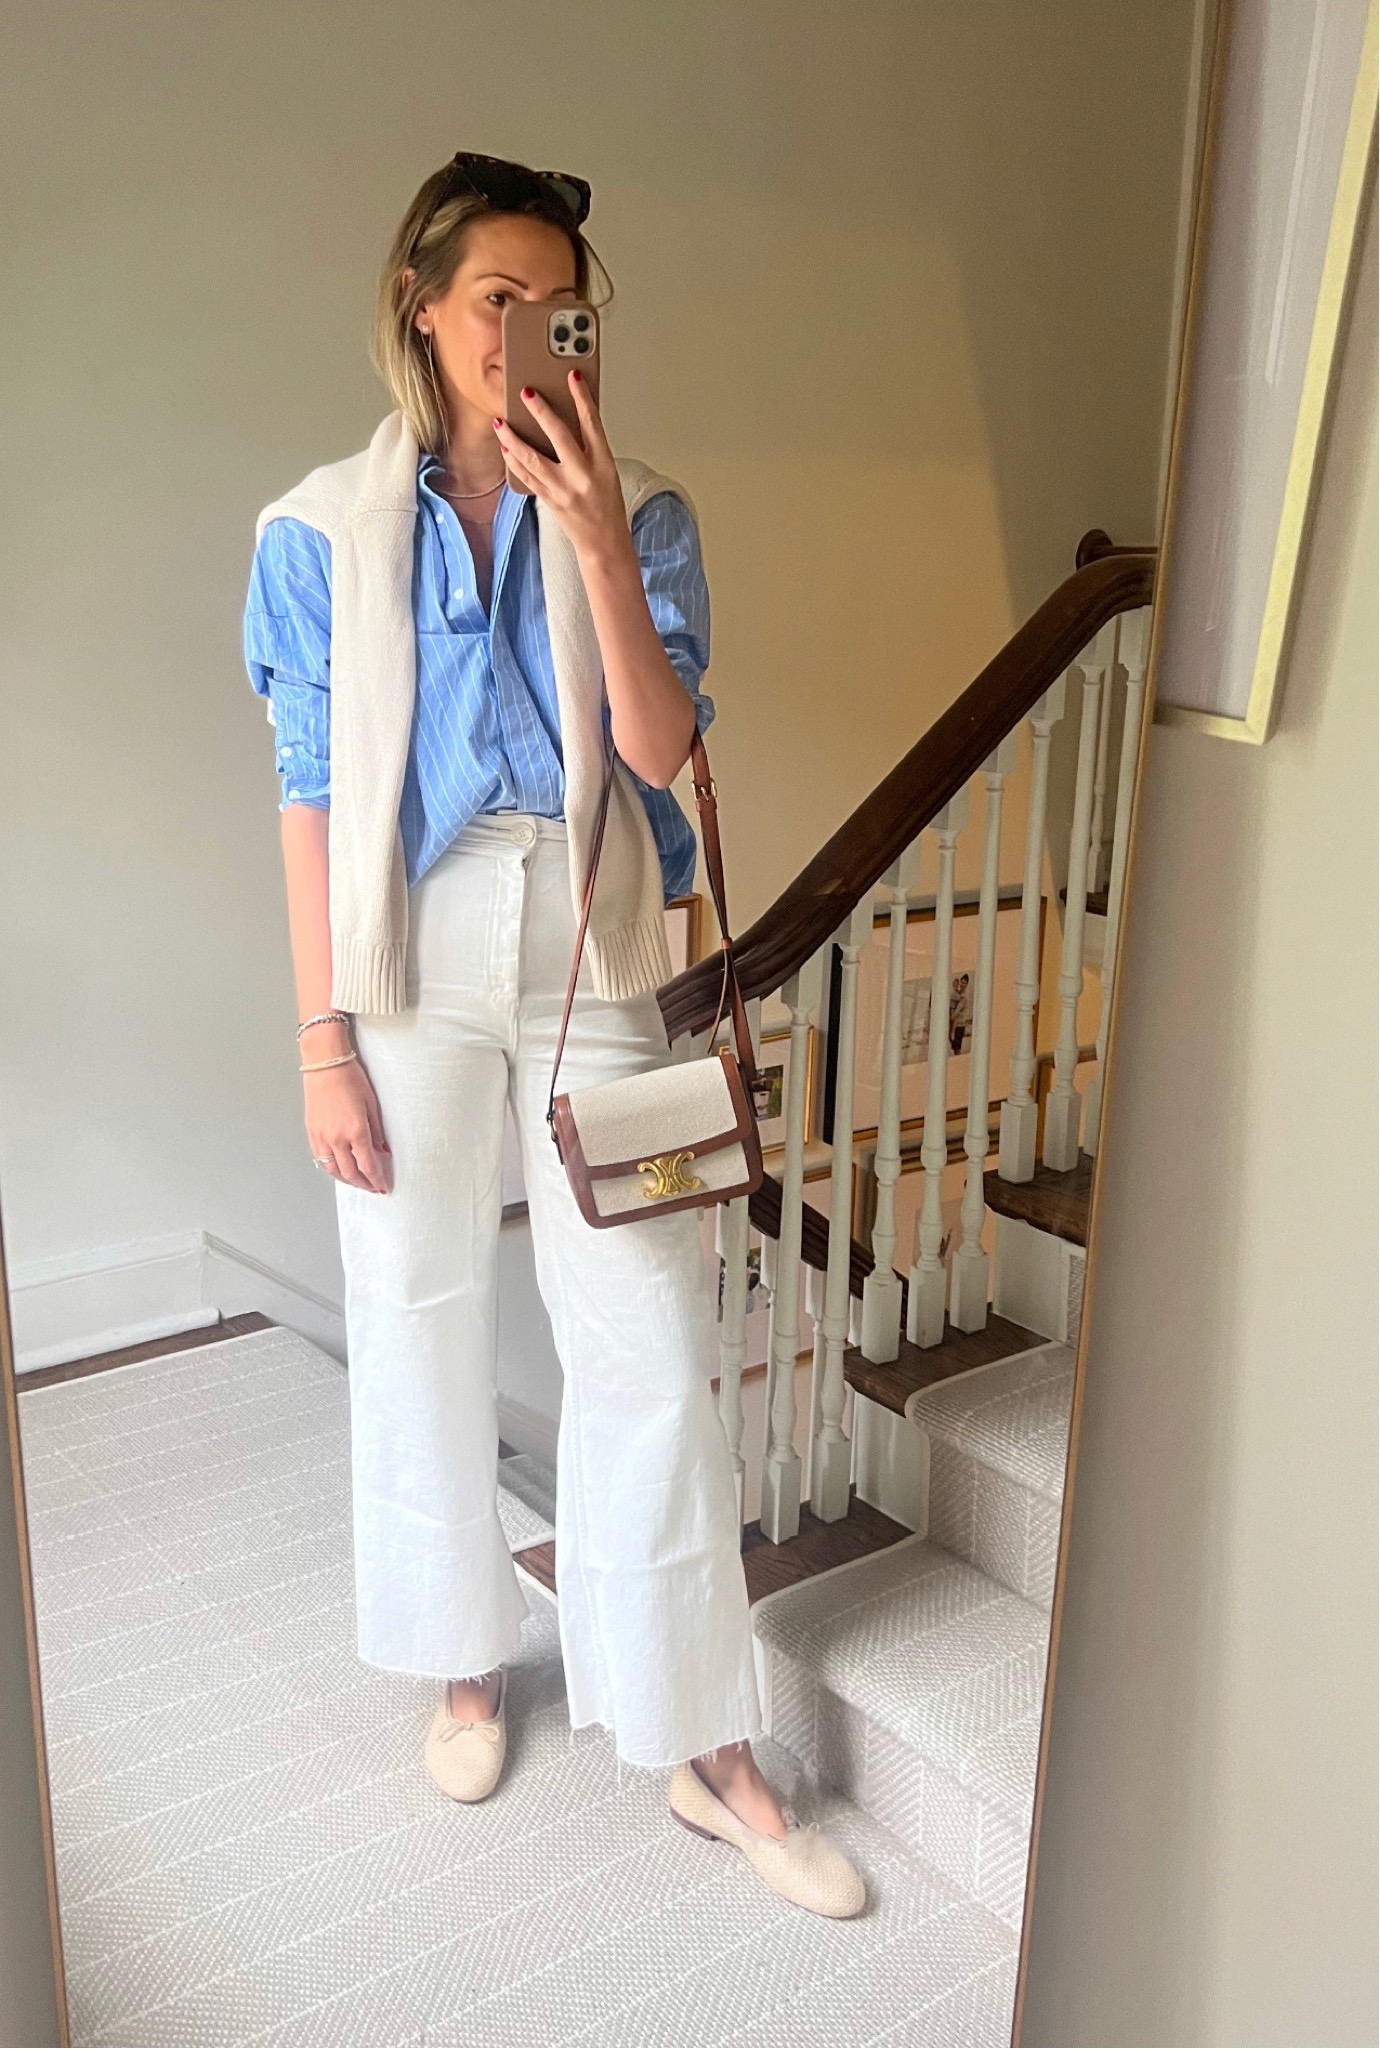 Blue and white Spring outfit inspiration